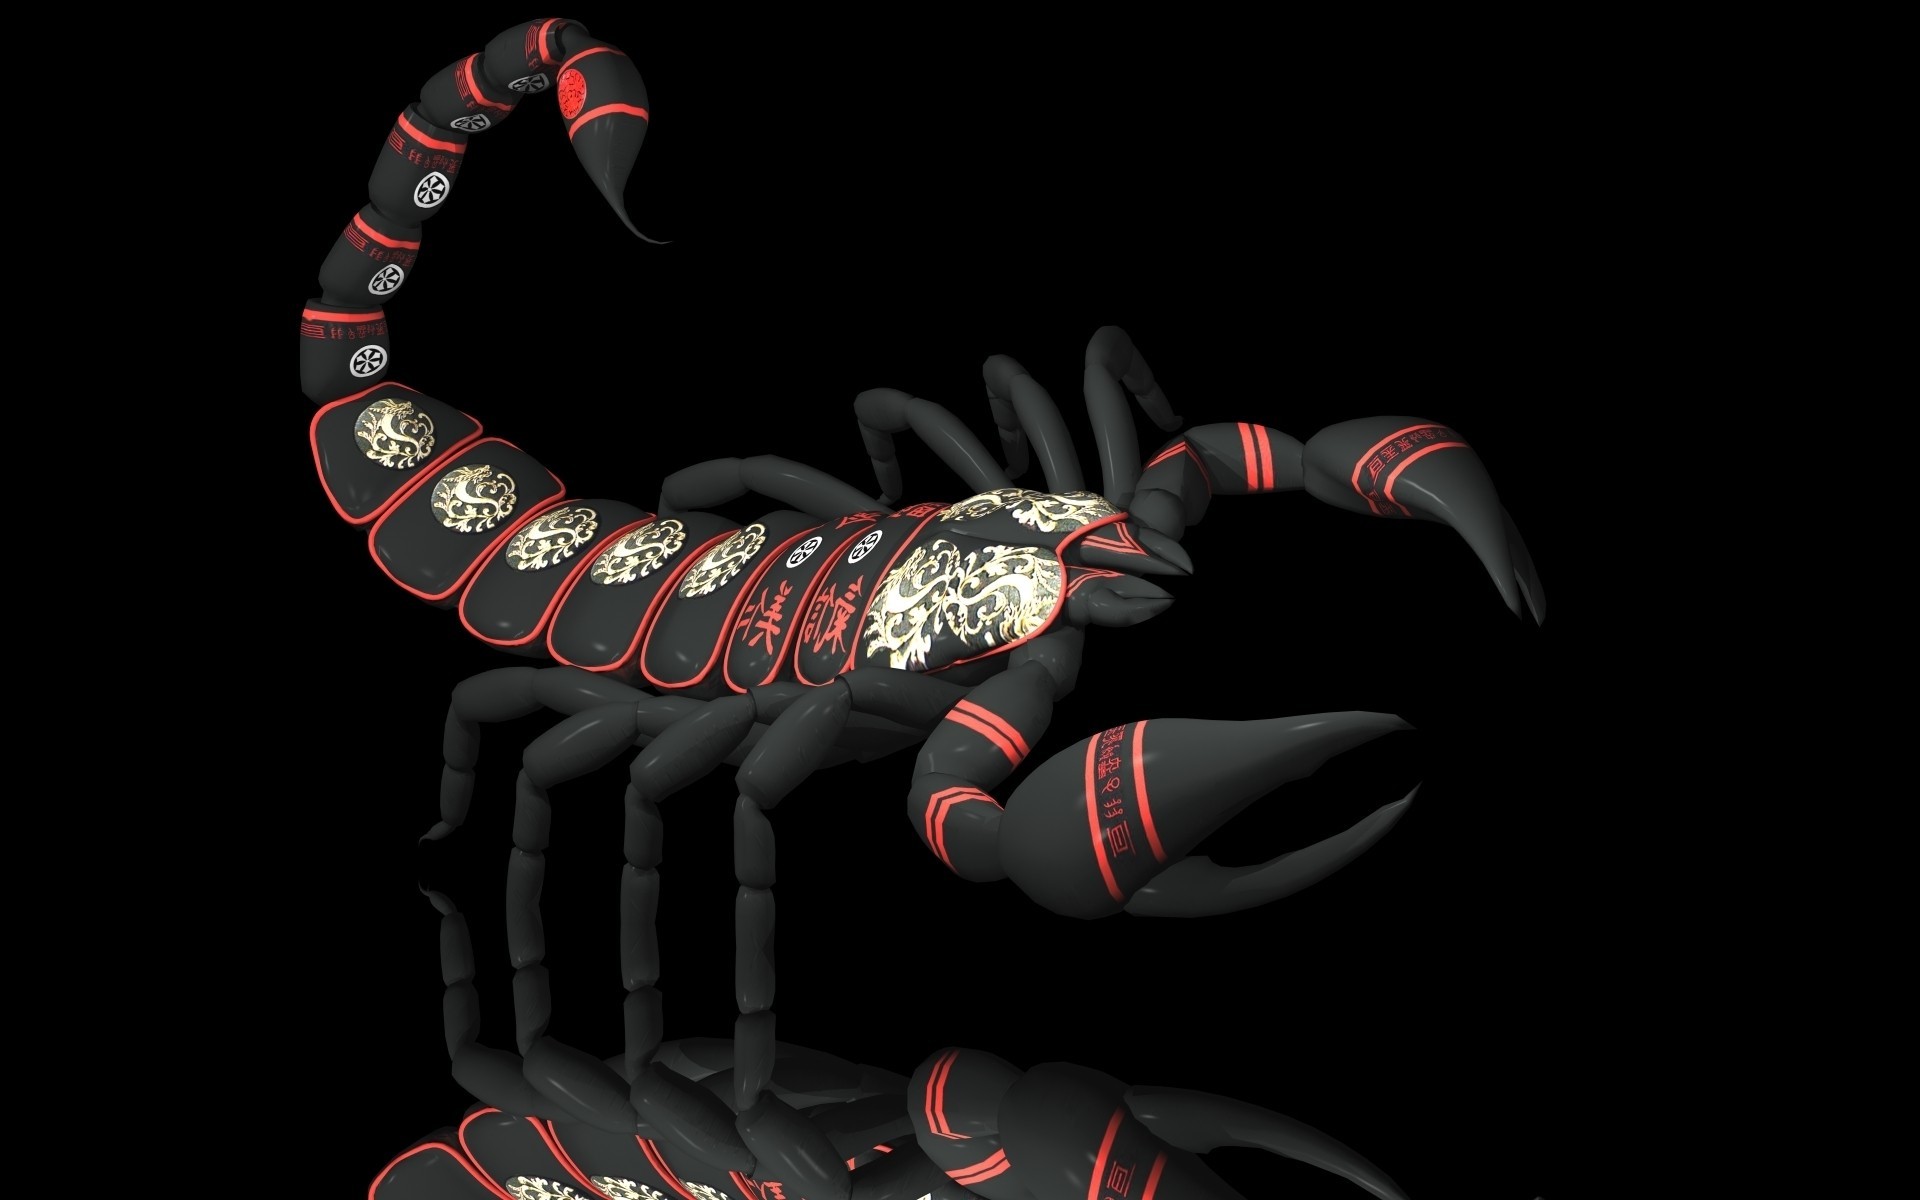 Scorpio wide hd wallpaper free images artwork cool images